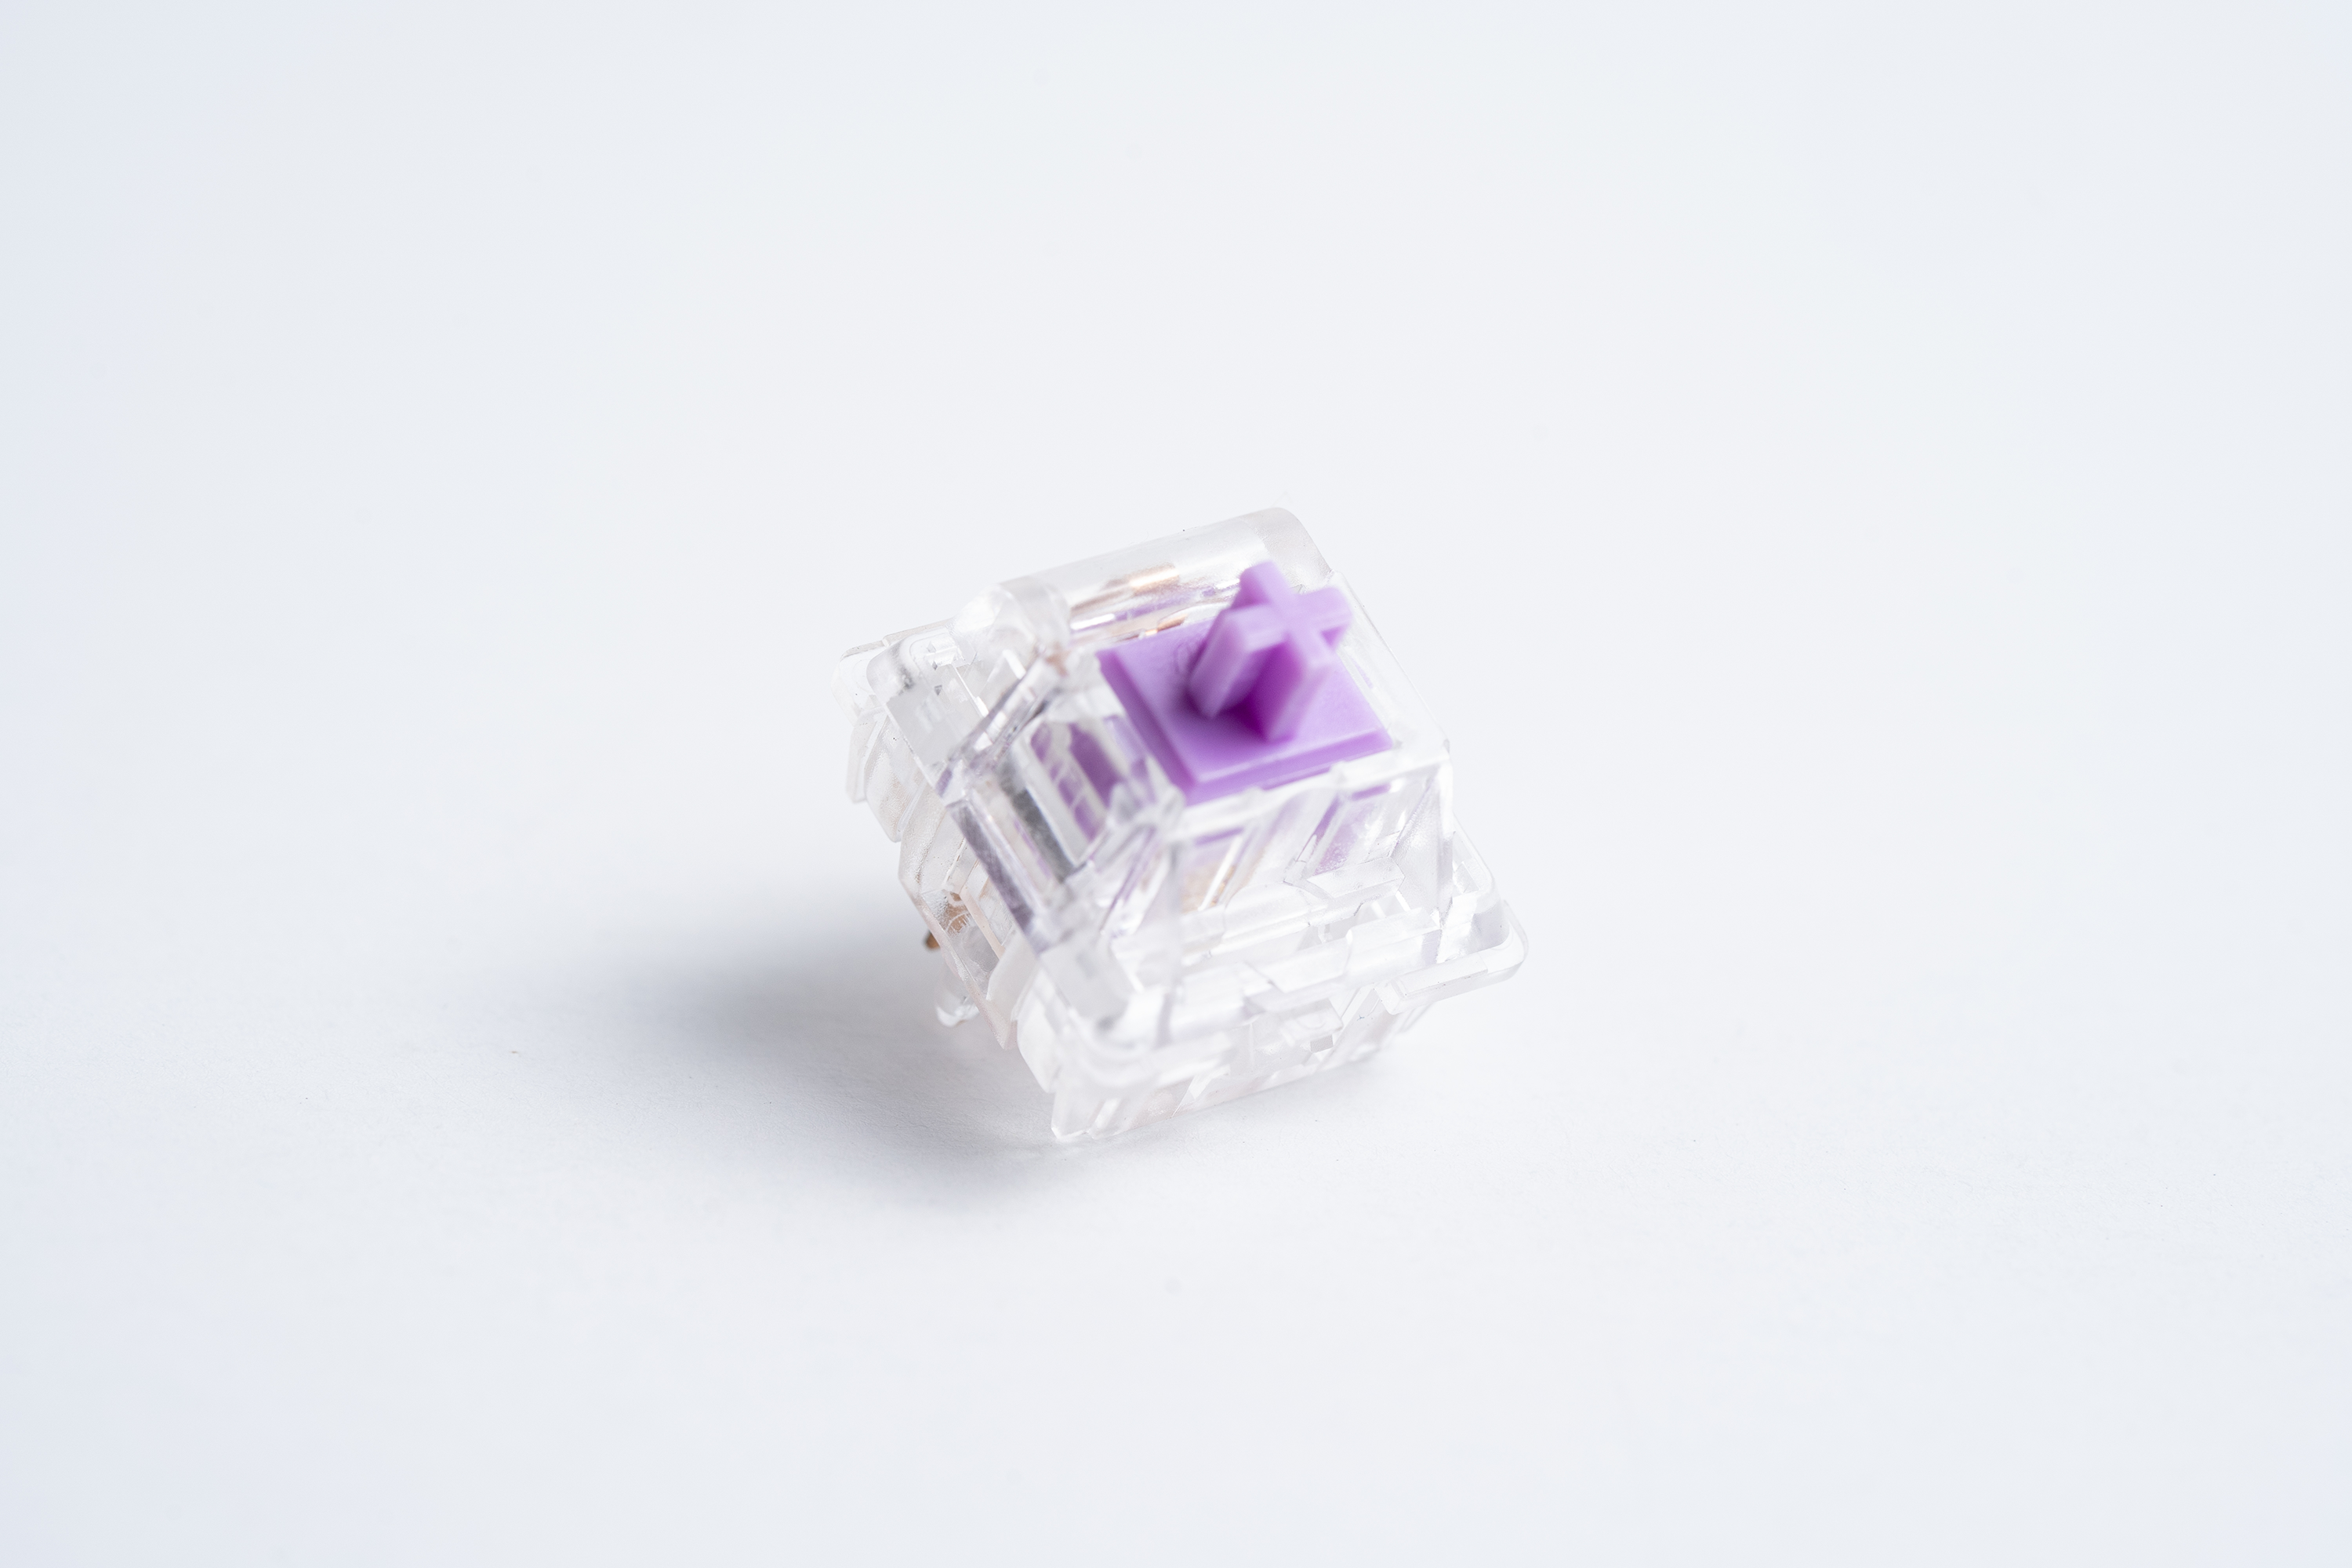 Durock L4 Creamy Purple Switches - KeebsForAll